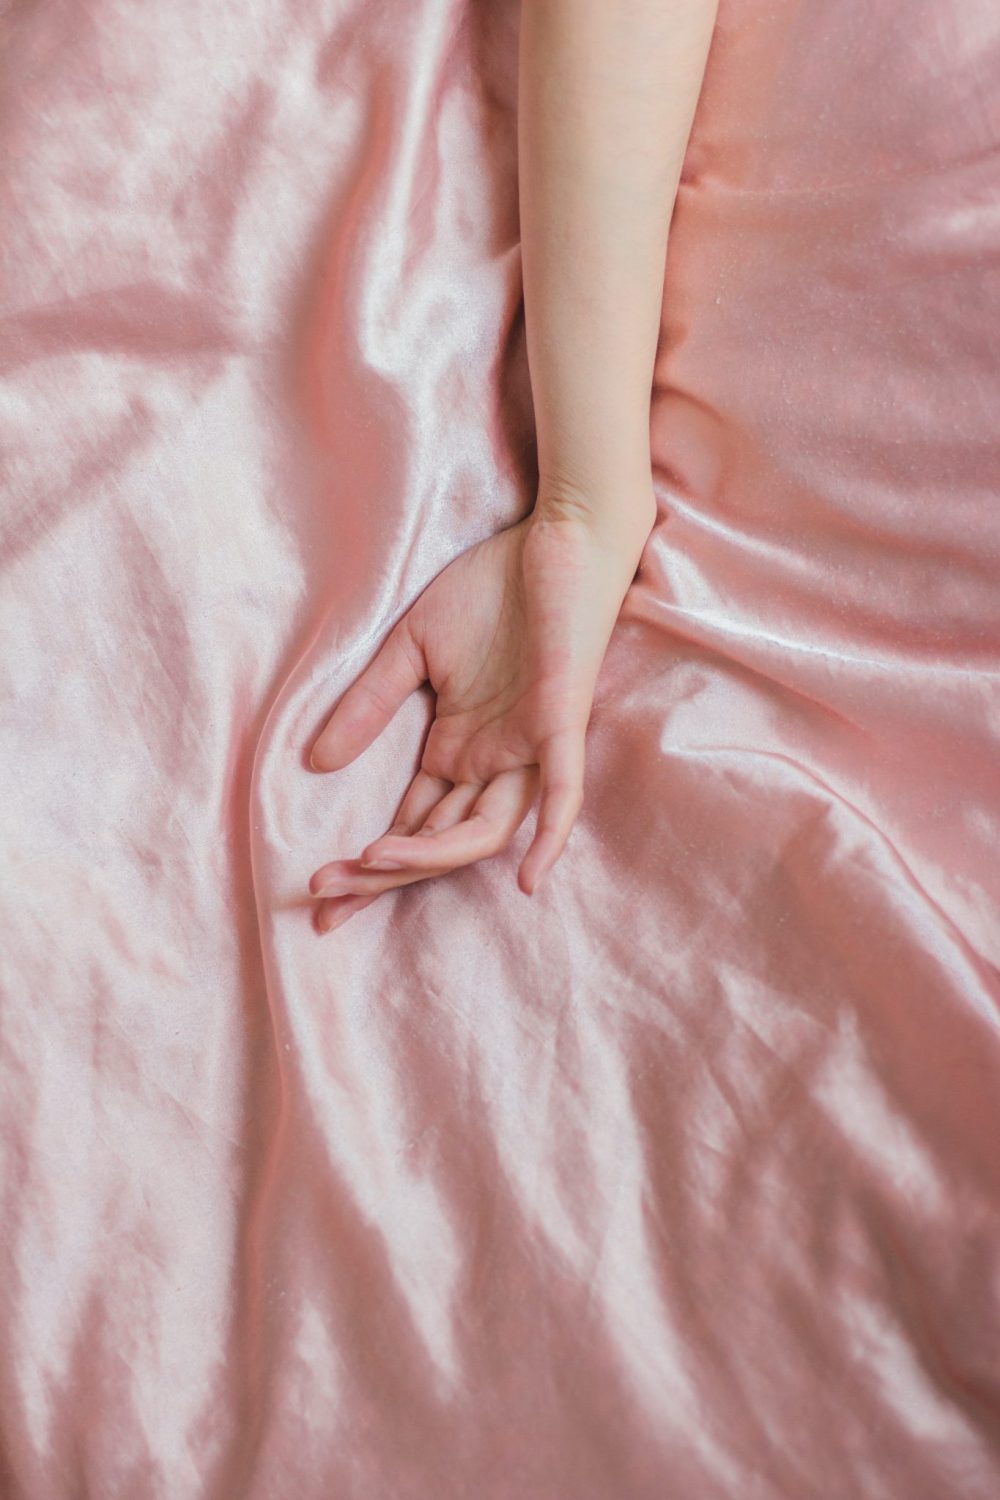 Why Should You Choose Silk Sleepwear Instead of Cotton or Linen?